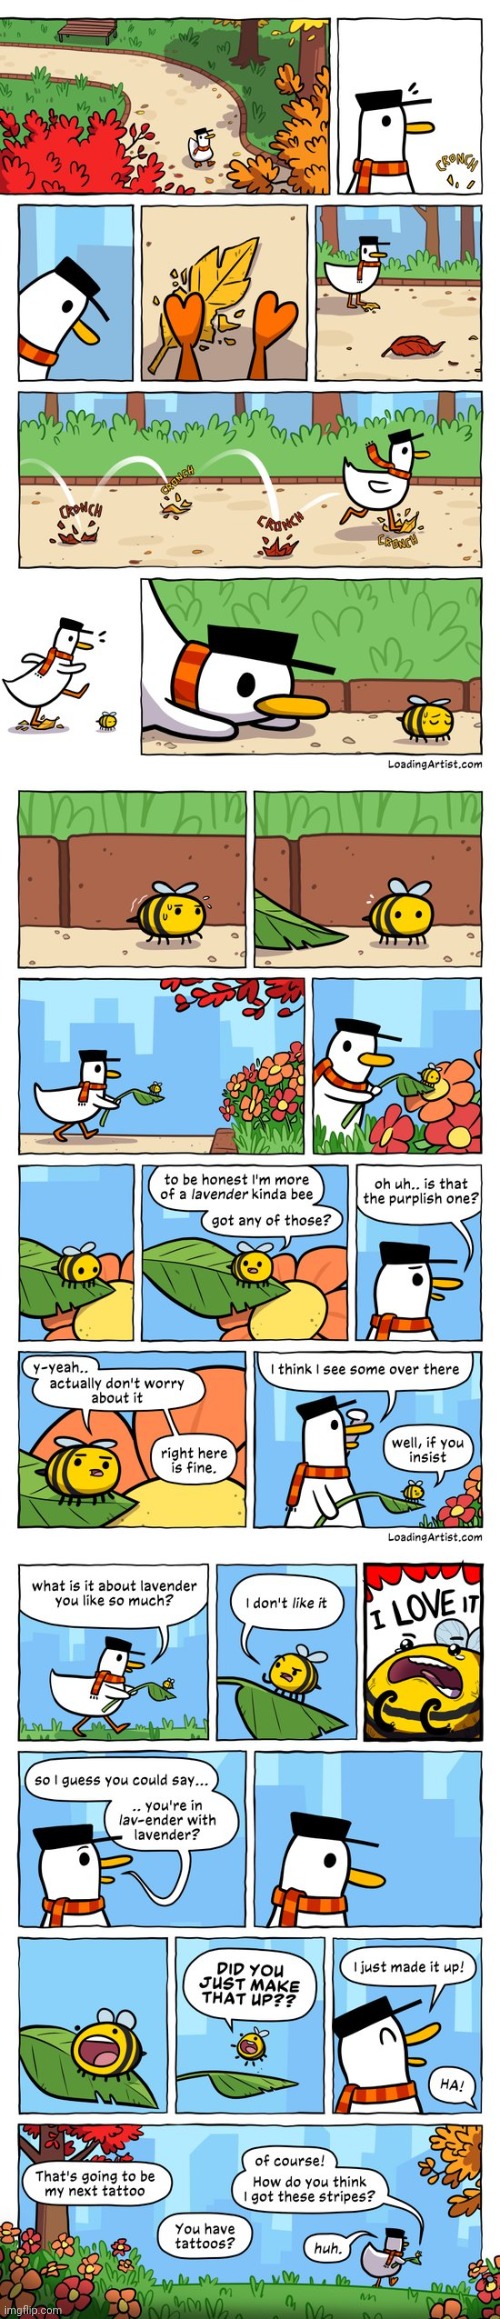 #2,910 | image tagged in comics/cartoons,comics,loading,artist,flowers,bees | made w/ Imgflip meme maker